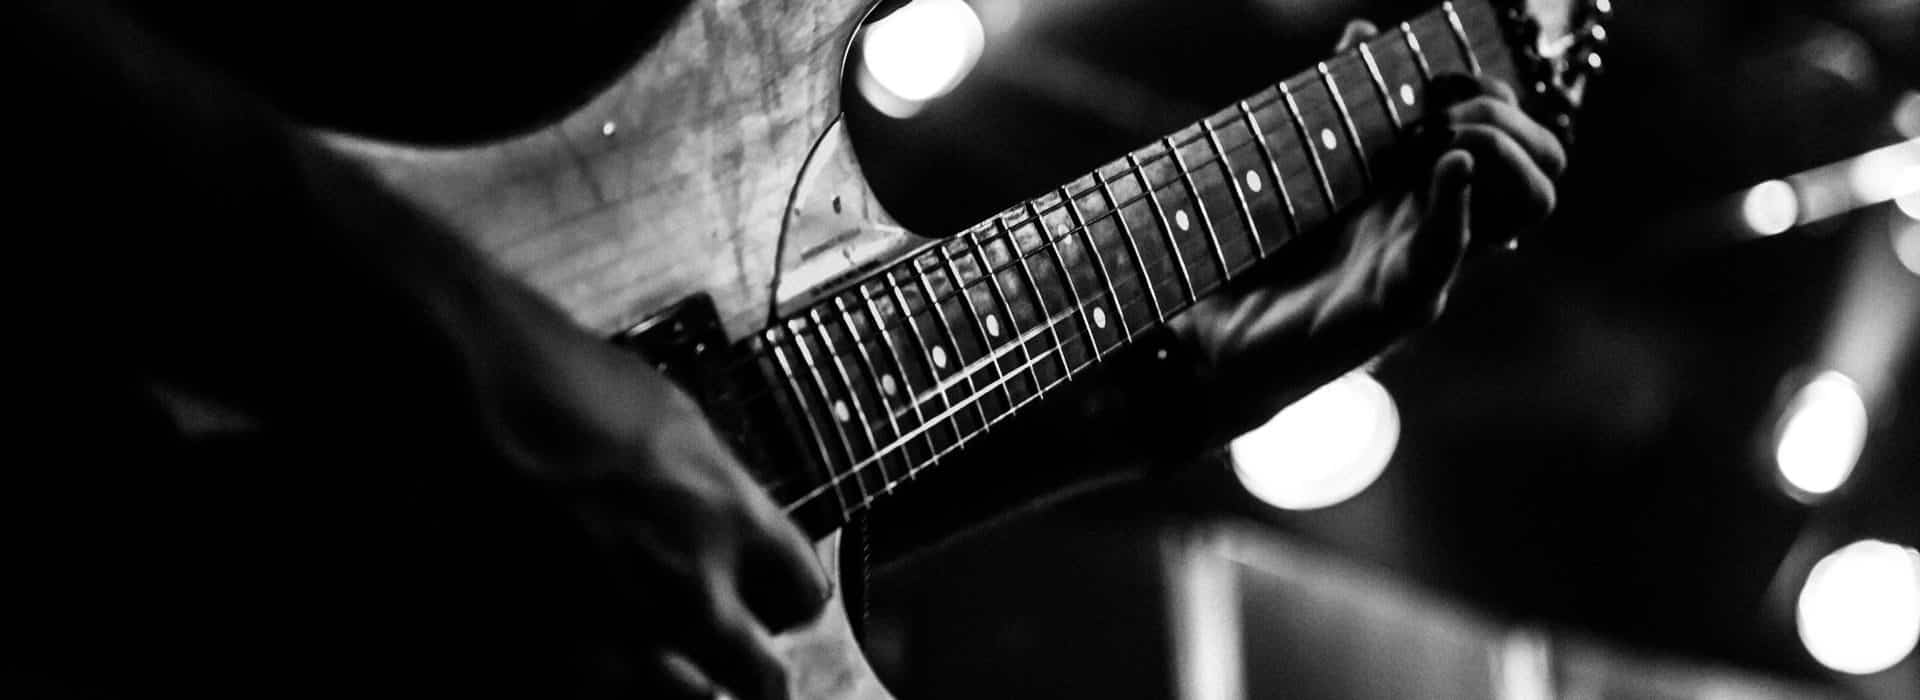 Black and white photo of man's hands playing a guitar